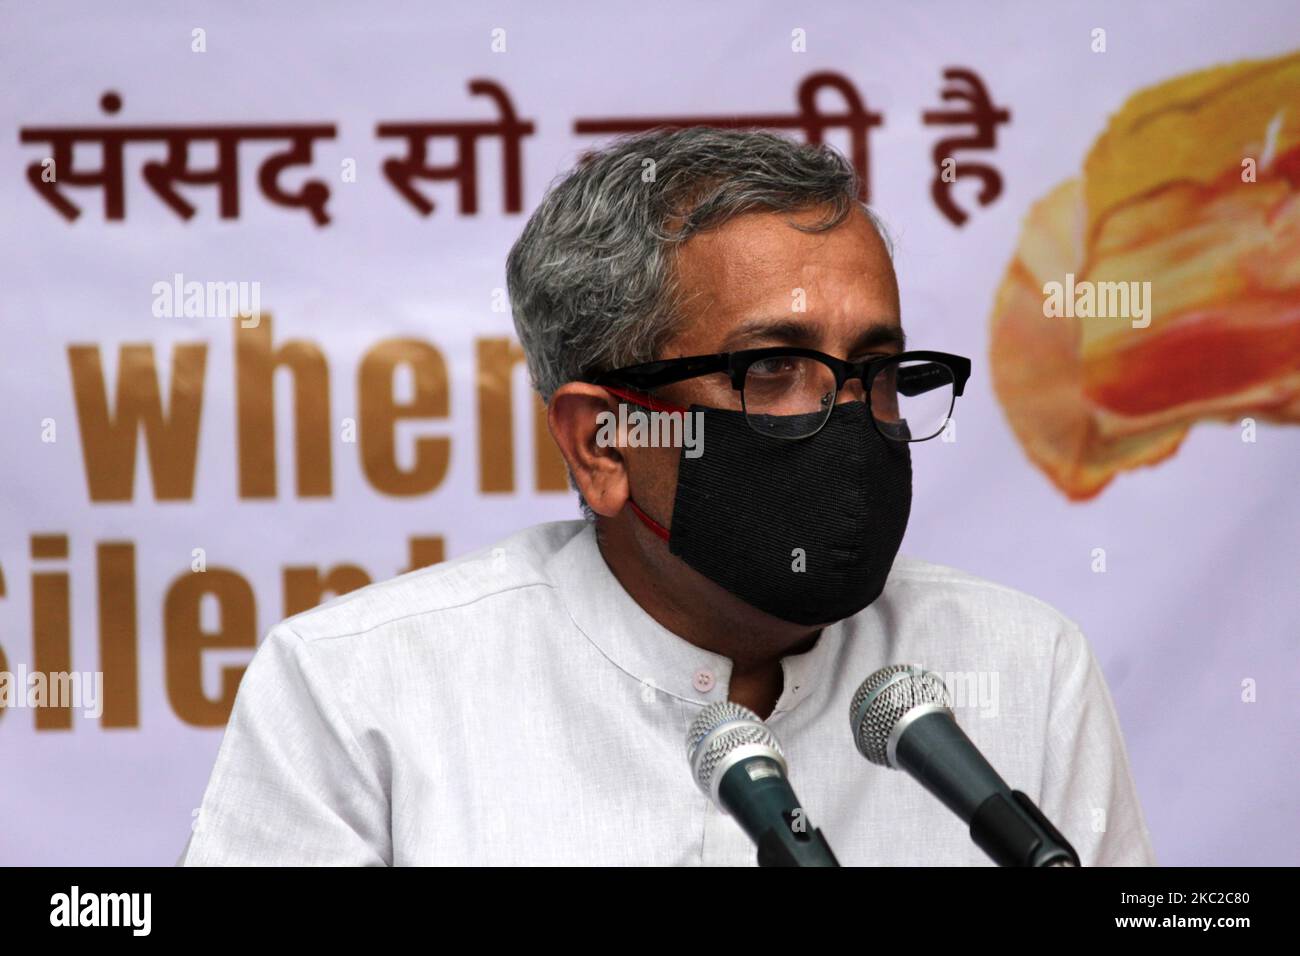 Senior Advocate Sanjay Hegde, addresses during a press conference on the Supreme Court's recent opinion on public protests, in which it said public places can't be occupied indefinitely in context of Shaheen Bagh, in New Delhi on October 22, 2020. The panel including eminent activists and people from civil society condemned the criminalization of right to peaceful public protest in a democracy. (Photo by Mayank Makhija/NurPhoto) Stock Photo